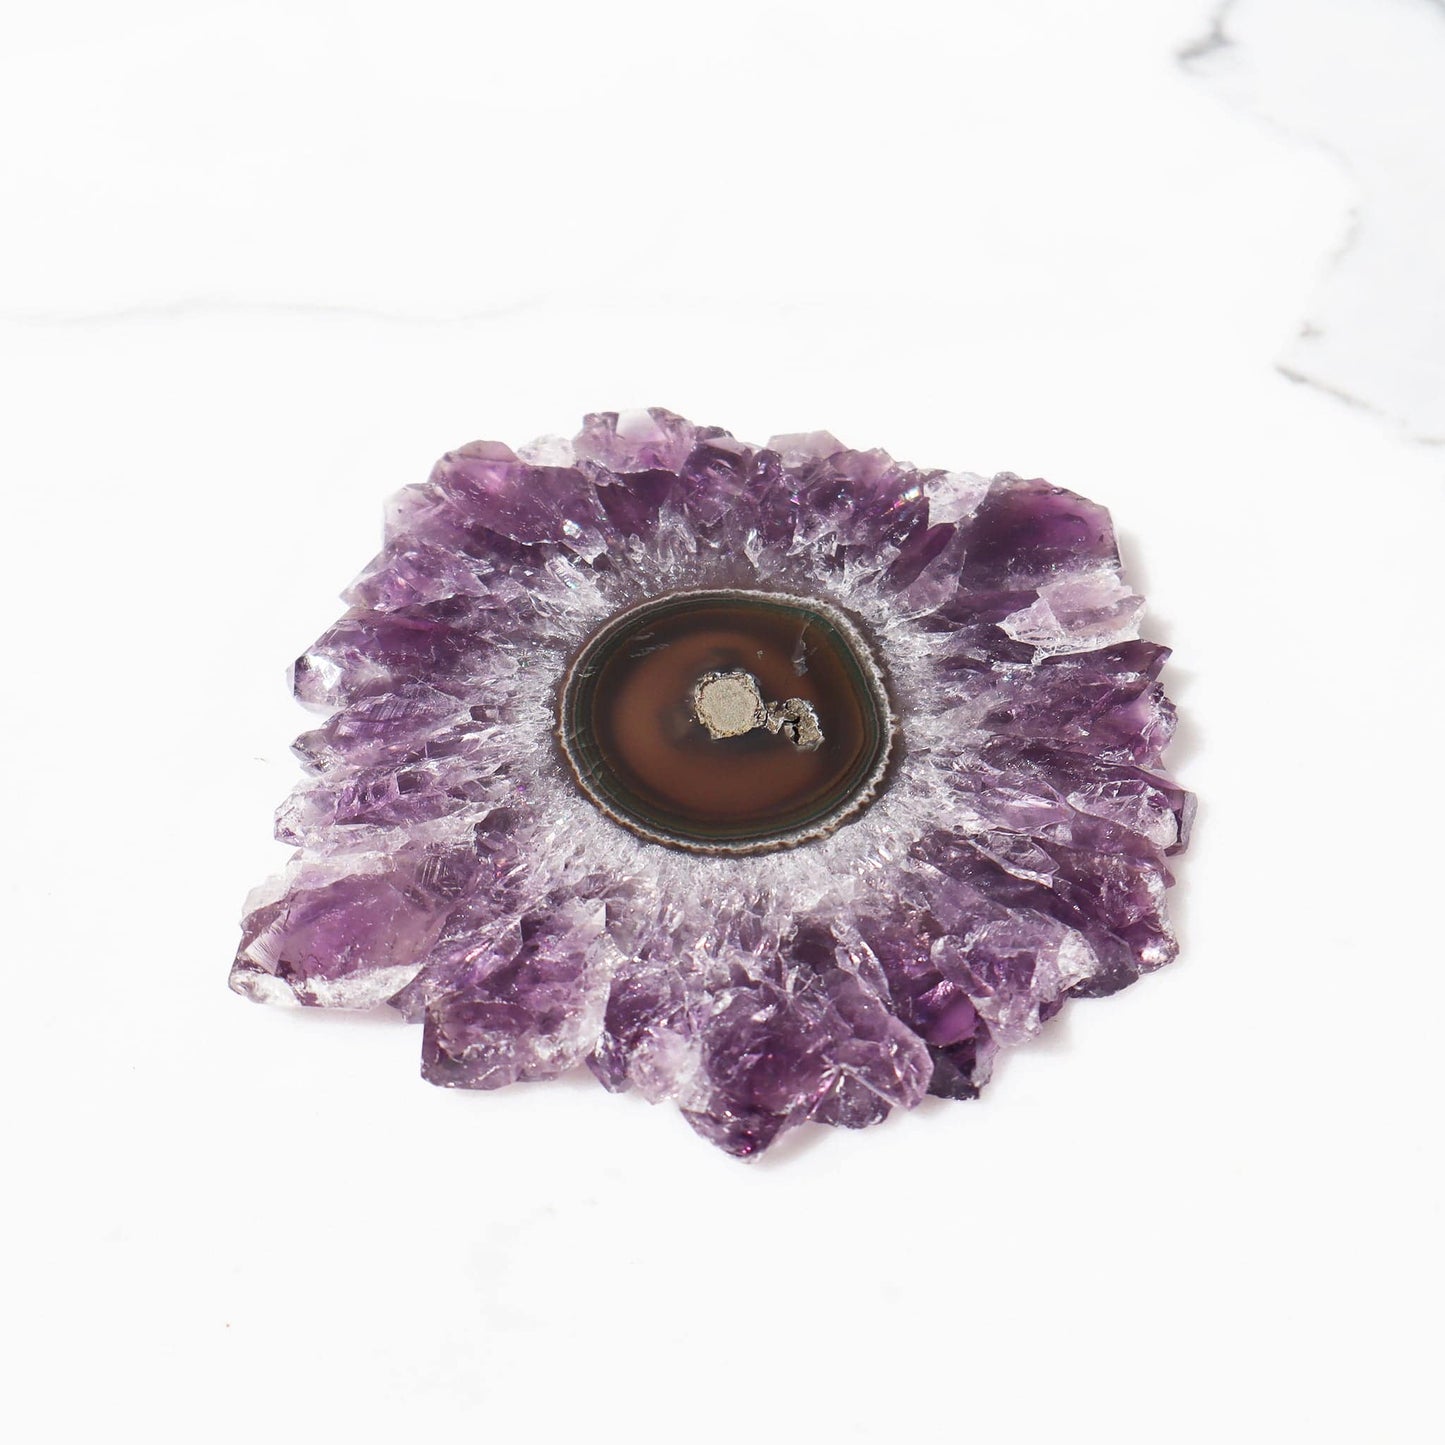 Crystal Mineral Flower Amethyst Stalactite - Deepest Earth